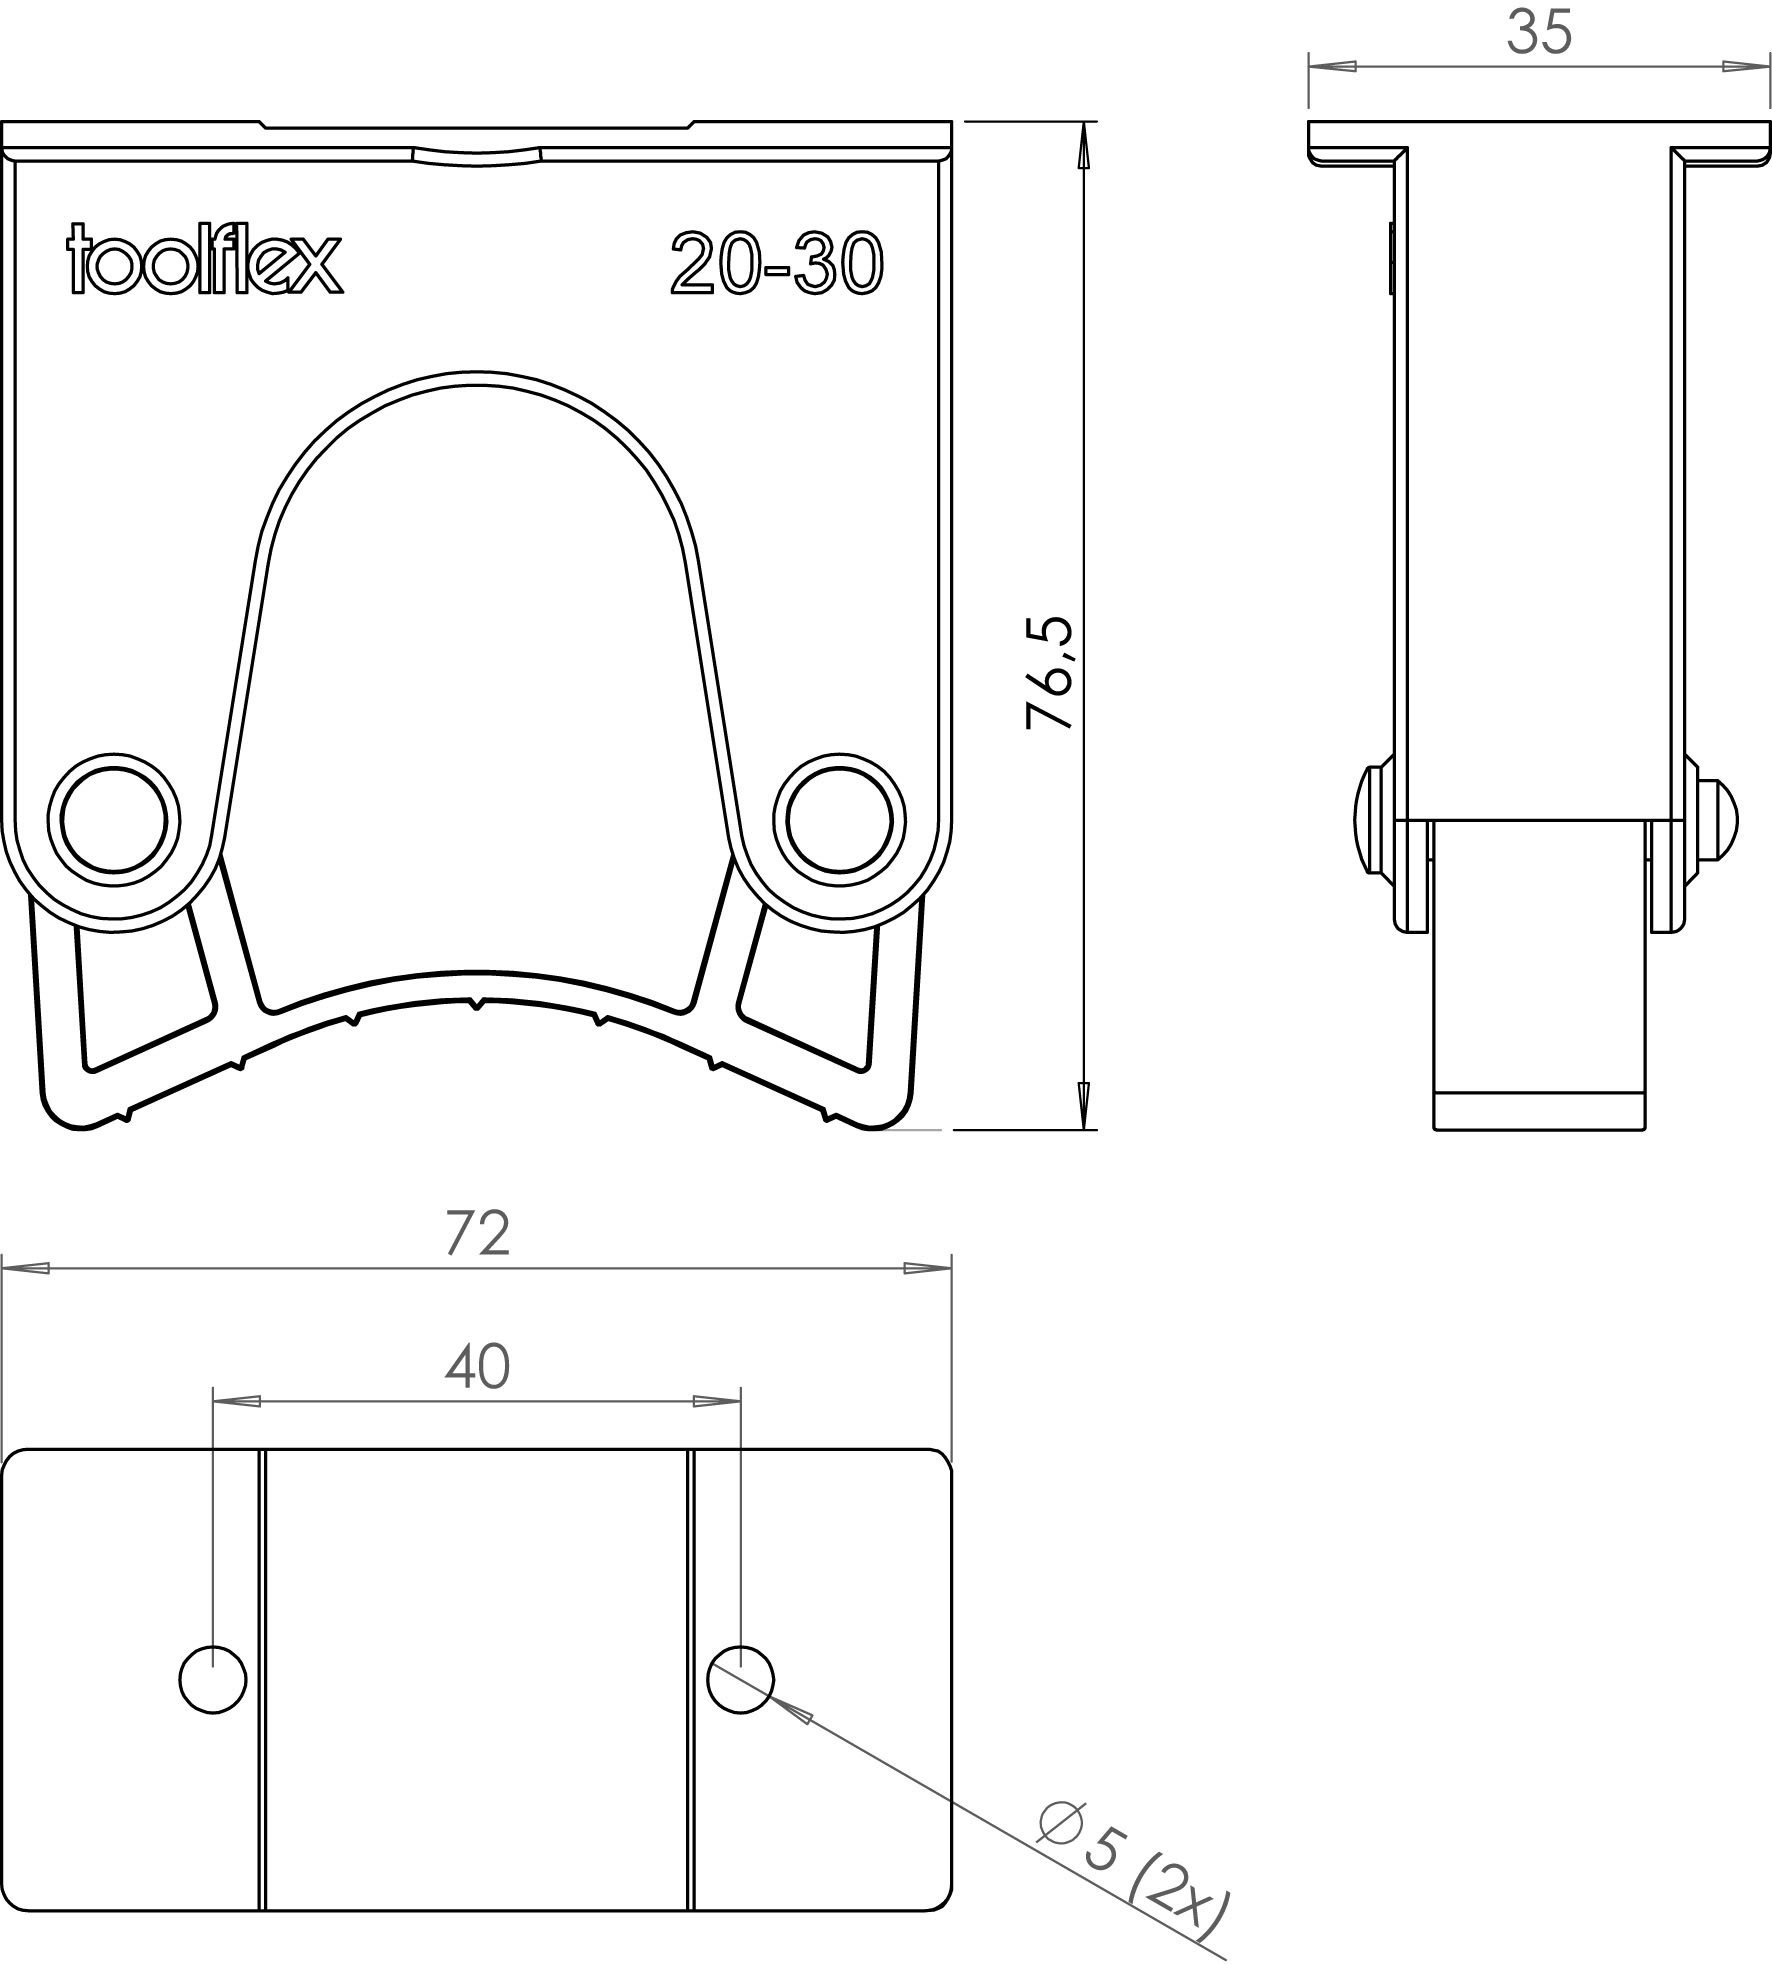 Toolflex holders for 20-30mm tools